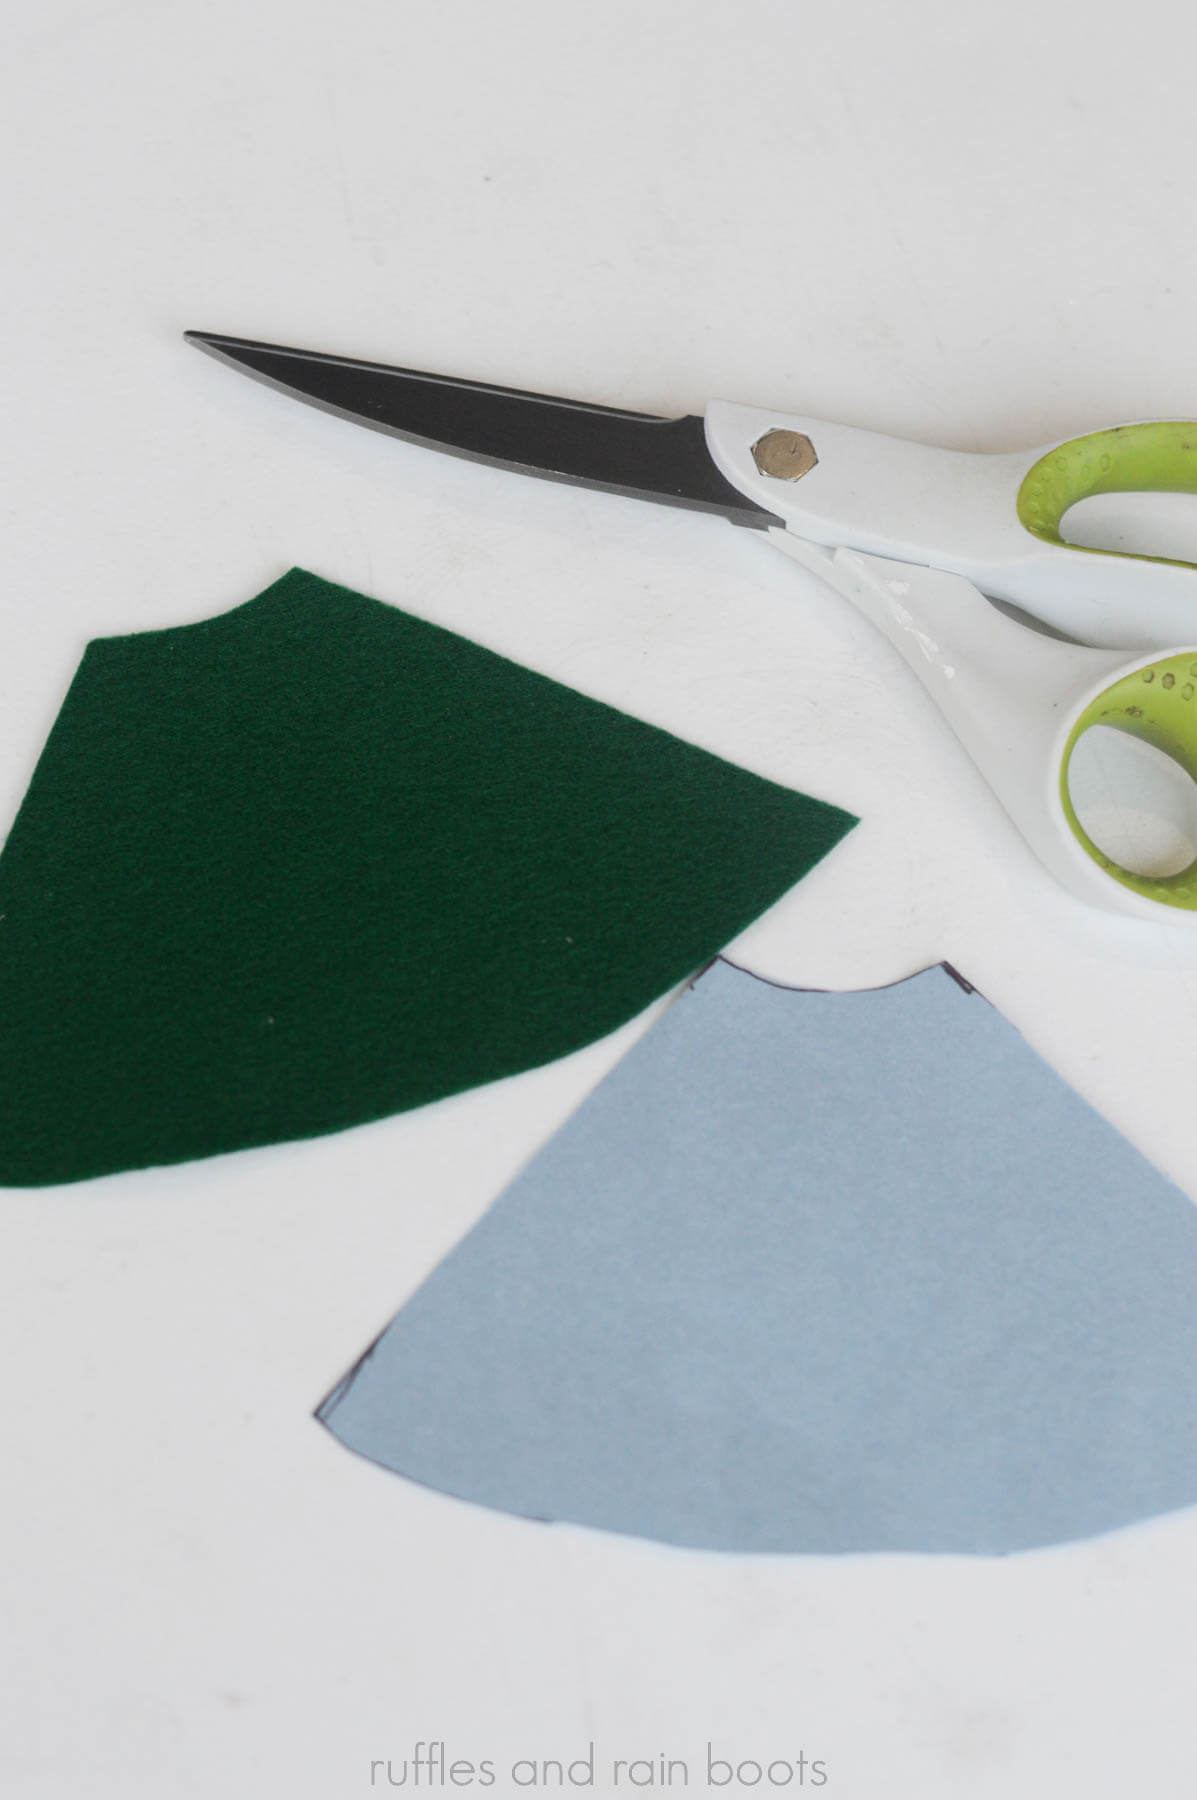 Image showing scissors and felt cut in a gnome hat shape on white background.